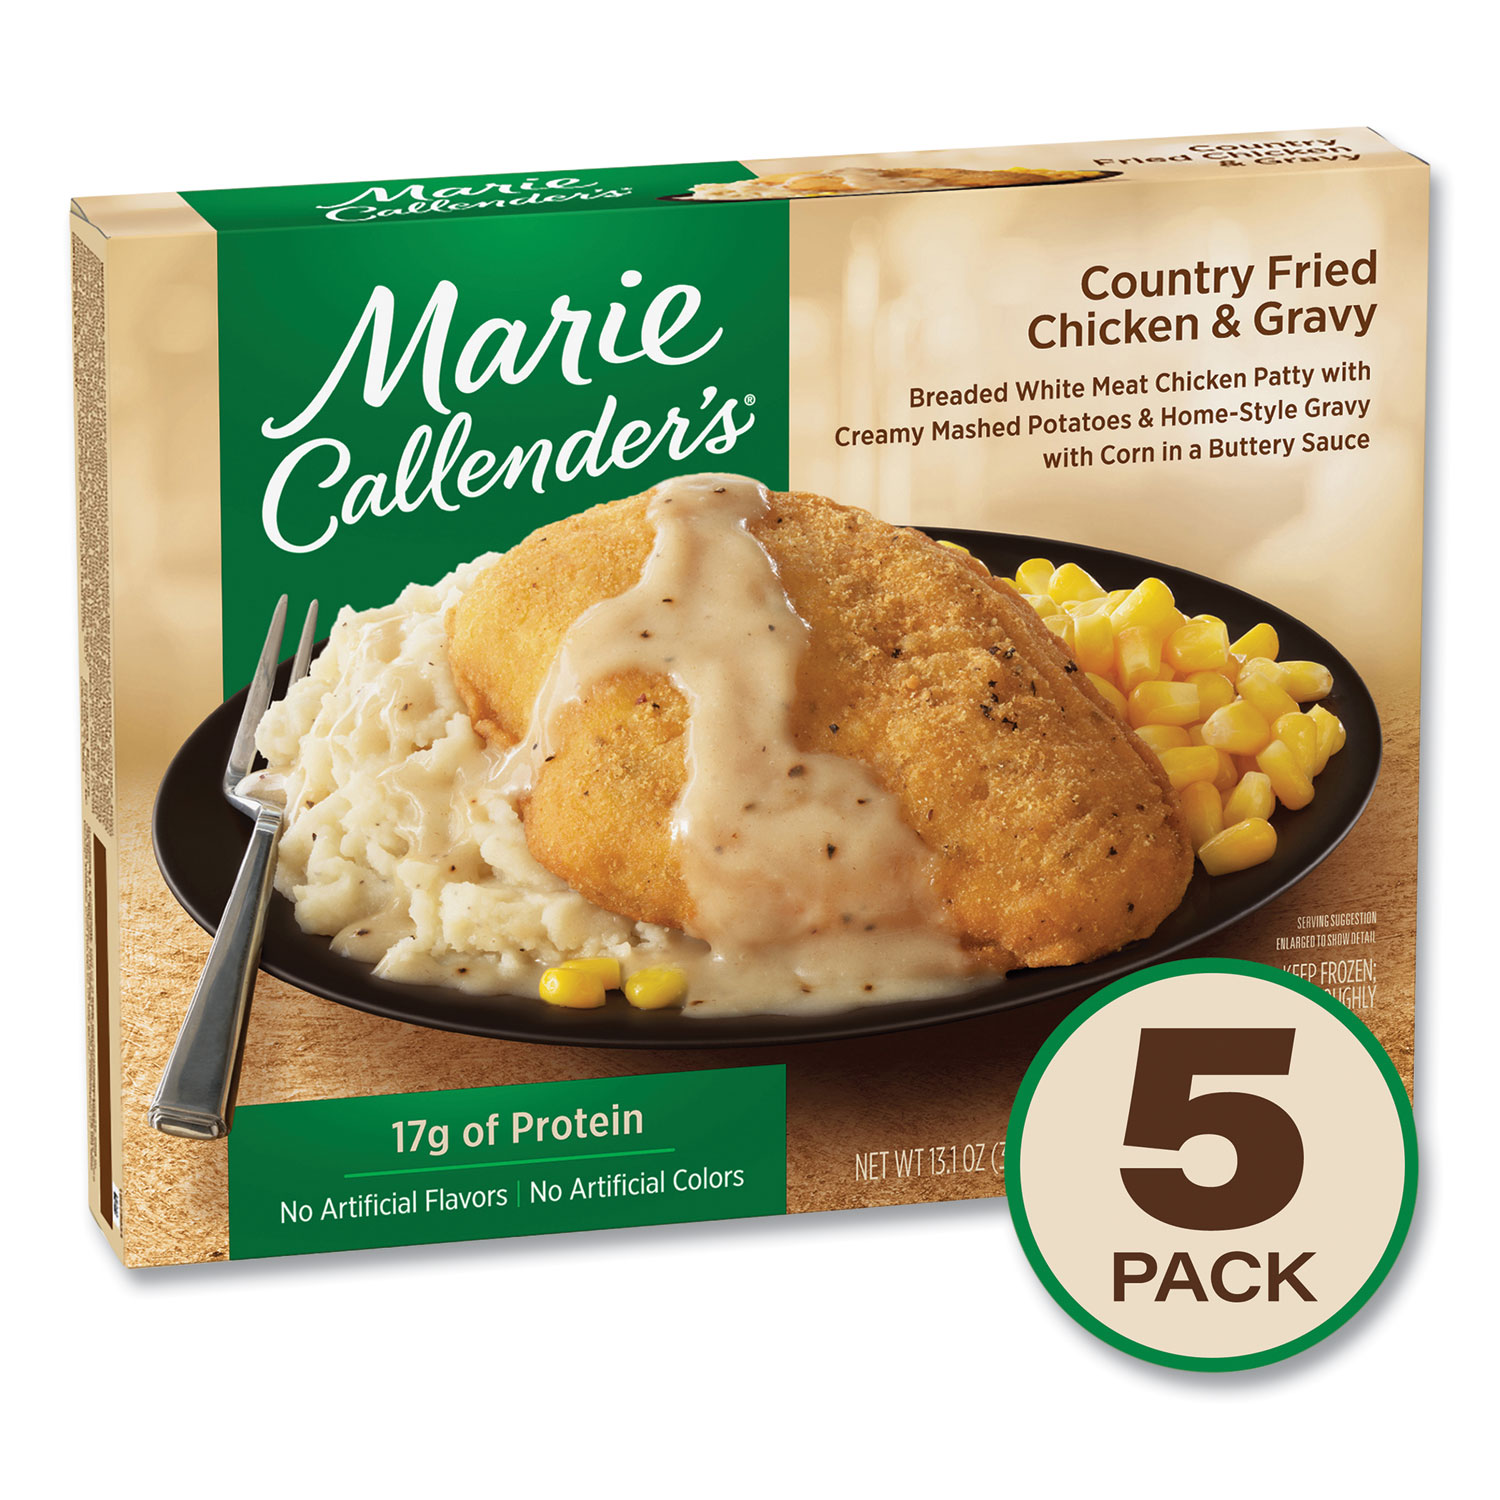  Marie Callender's 2113190533 Country Fried Chicken and Gravy, 13.1 oz Bowl, 5/Pack, Free Delivery in 1-4 Business Days (GRR90300169) 